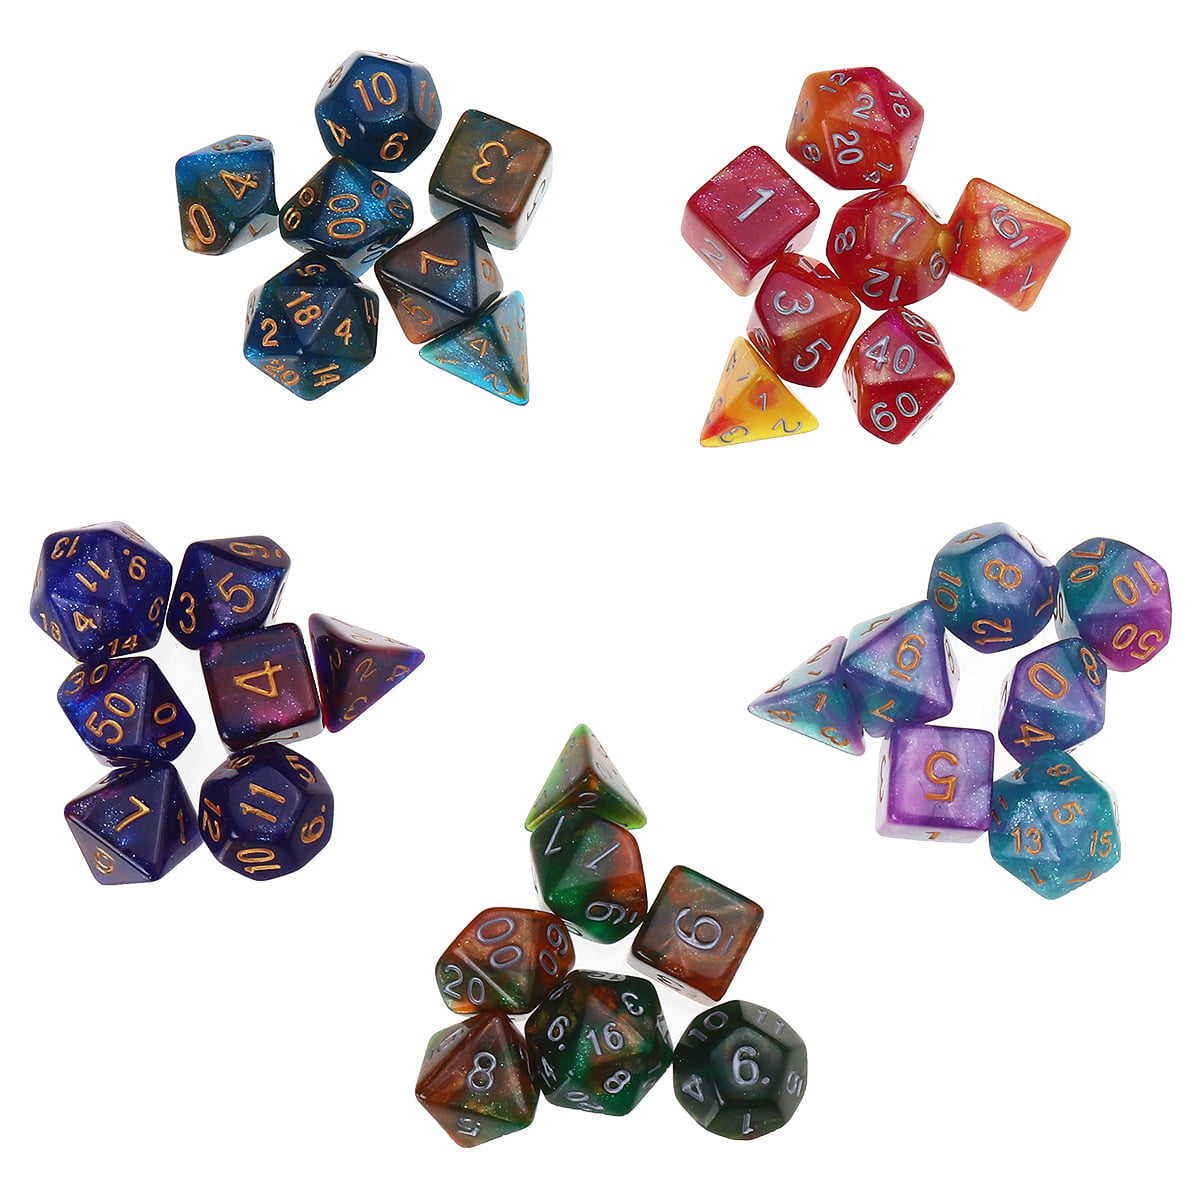 Bag for DND RPG MTG Role Playing Board 35Pcs/Set Acrylic Polyhedral Dice 